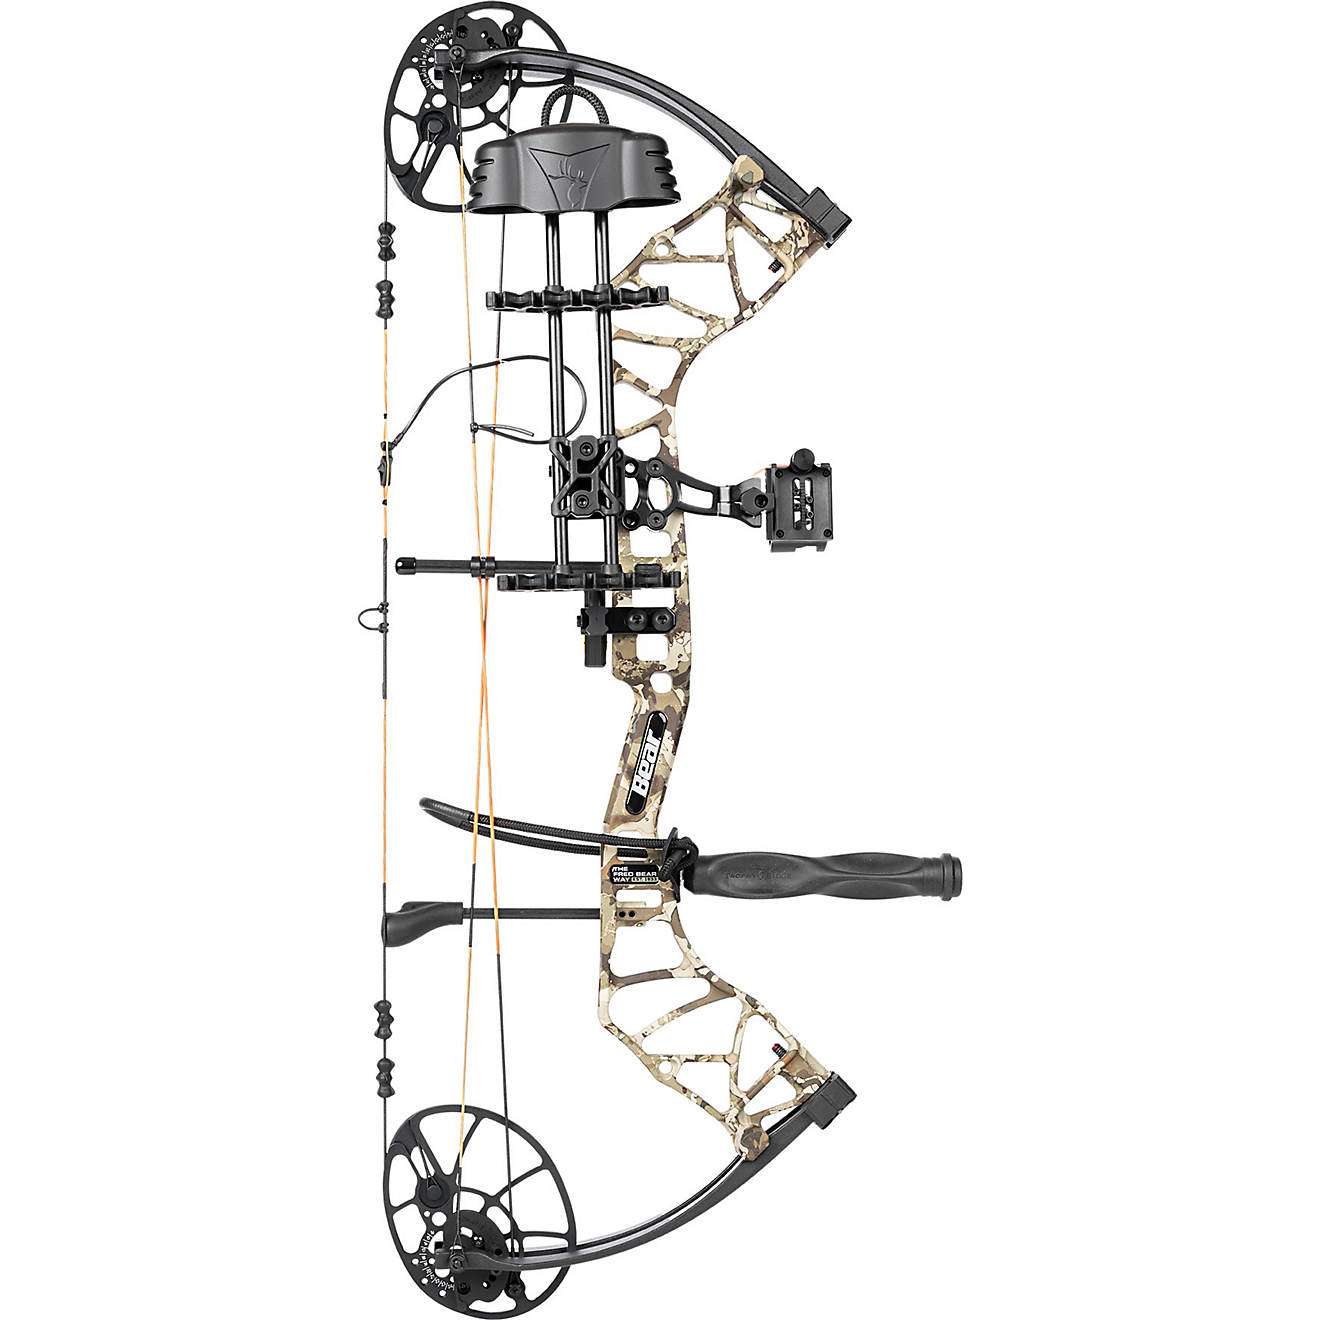 <p><strong>Bear Archery Legit RH-70 Compound Bow with Ready To Hunt Package</strong><br> As a hunter dives into bow hunting, it's often an intimidating task to buy a compound bow and put together all the accessories needed. Bear Archery has a simple solution to that â The Legit RH-70 Compound Bow with Ready to Hunt Package. This package comes with everything a hunter needs to get started besides the arrows and broadheads! <a href=